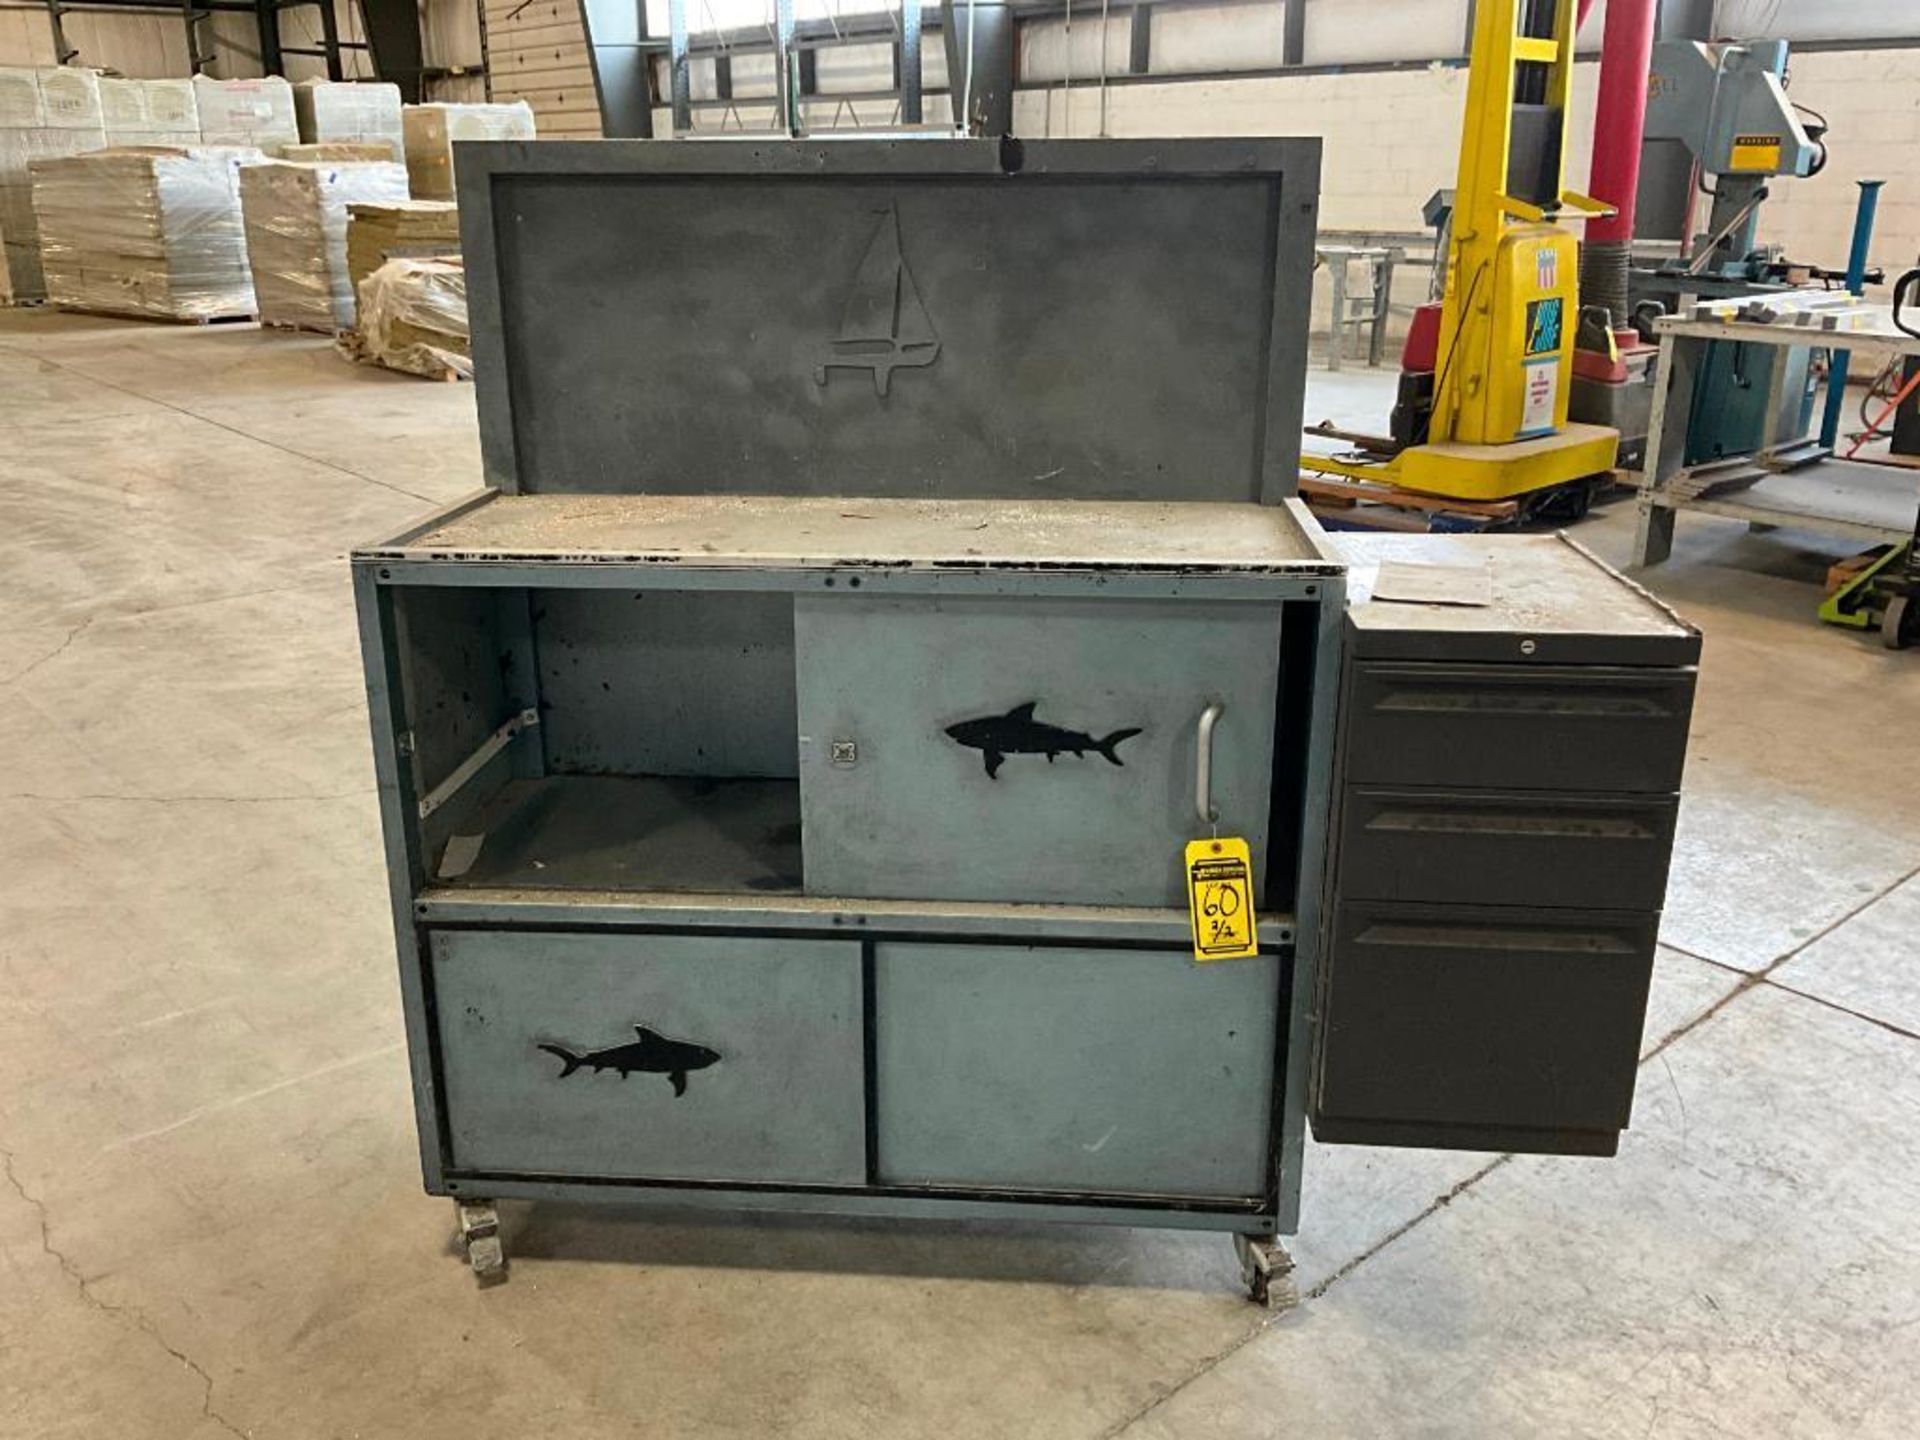 Metal Cabinet on Casters, 60" H x 49" W x 19" D